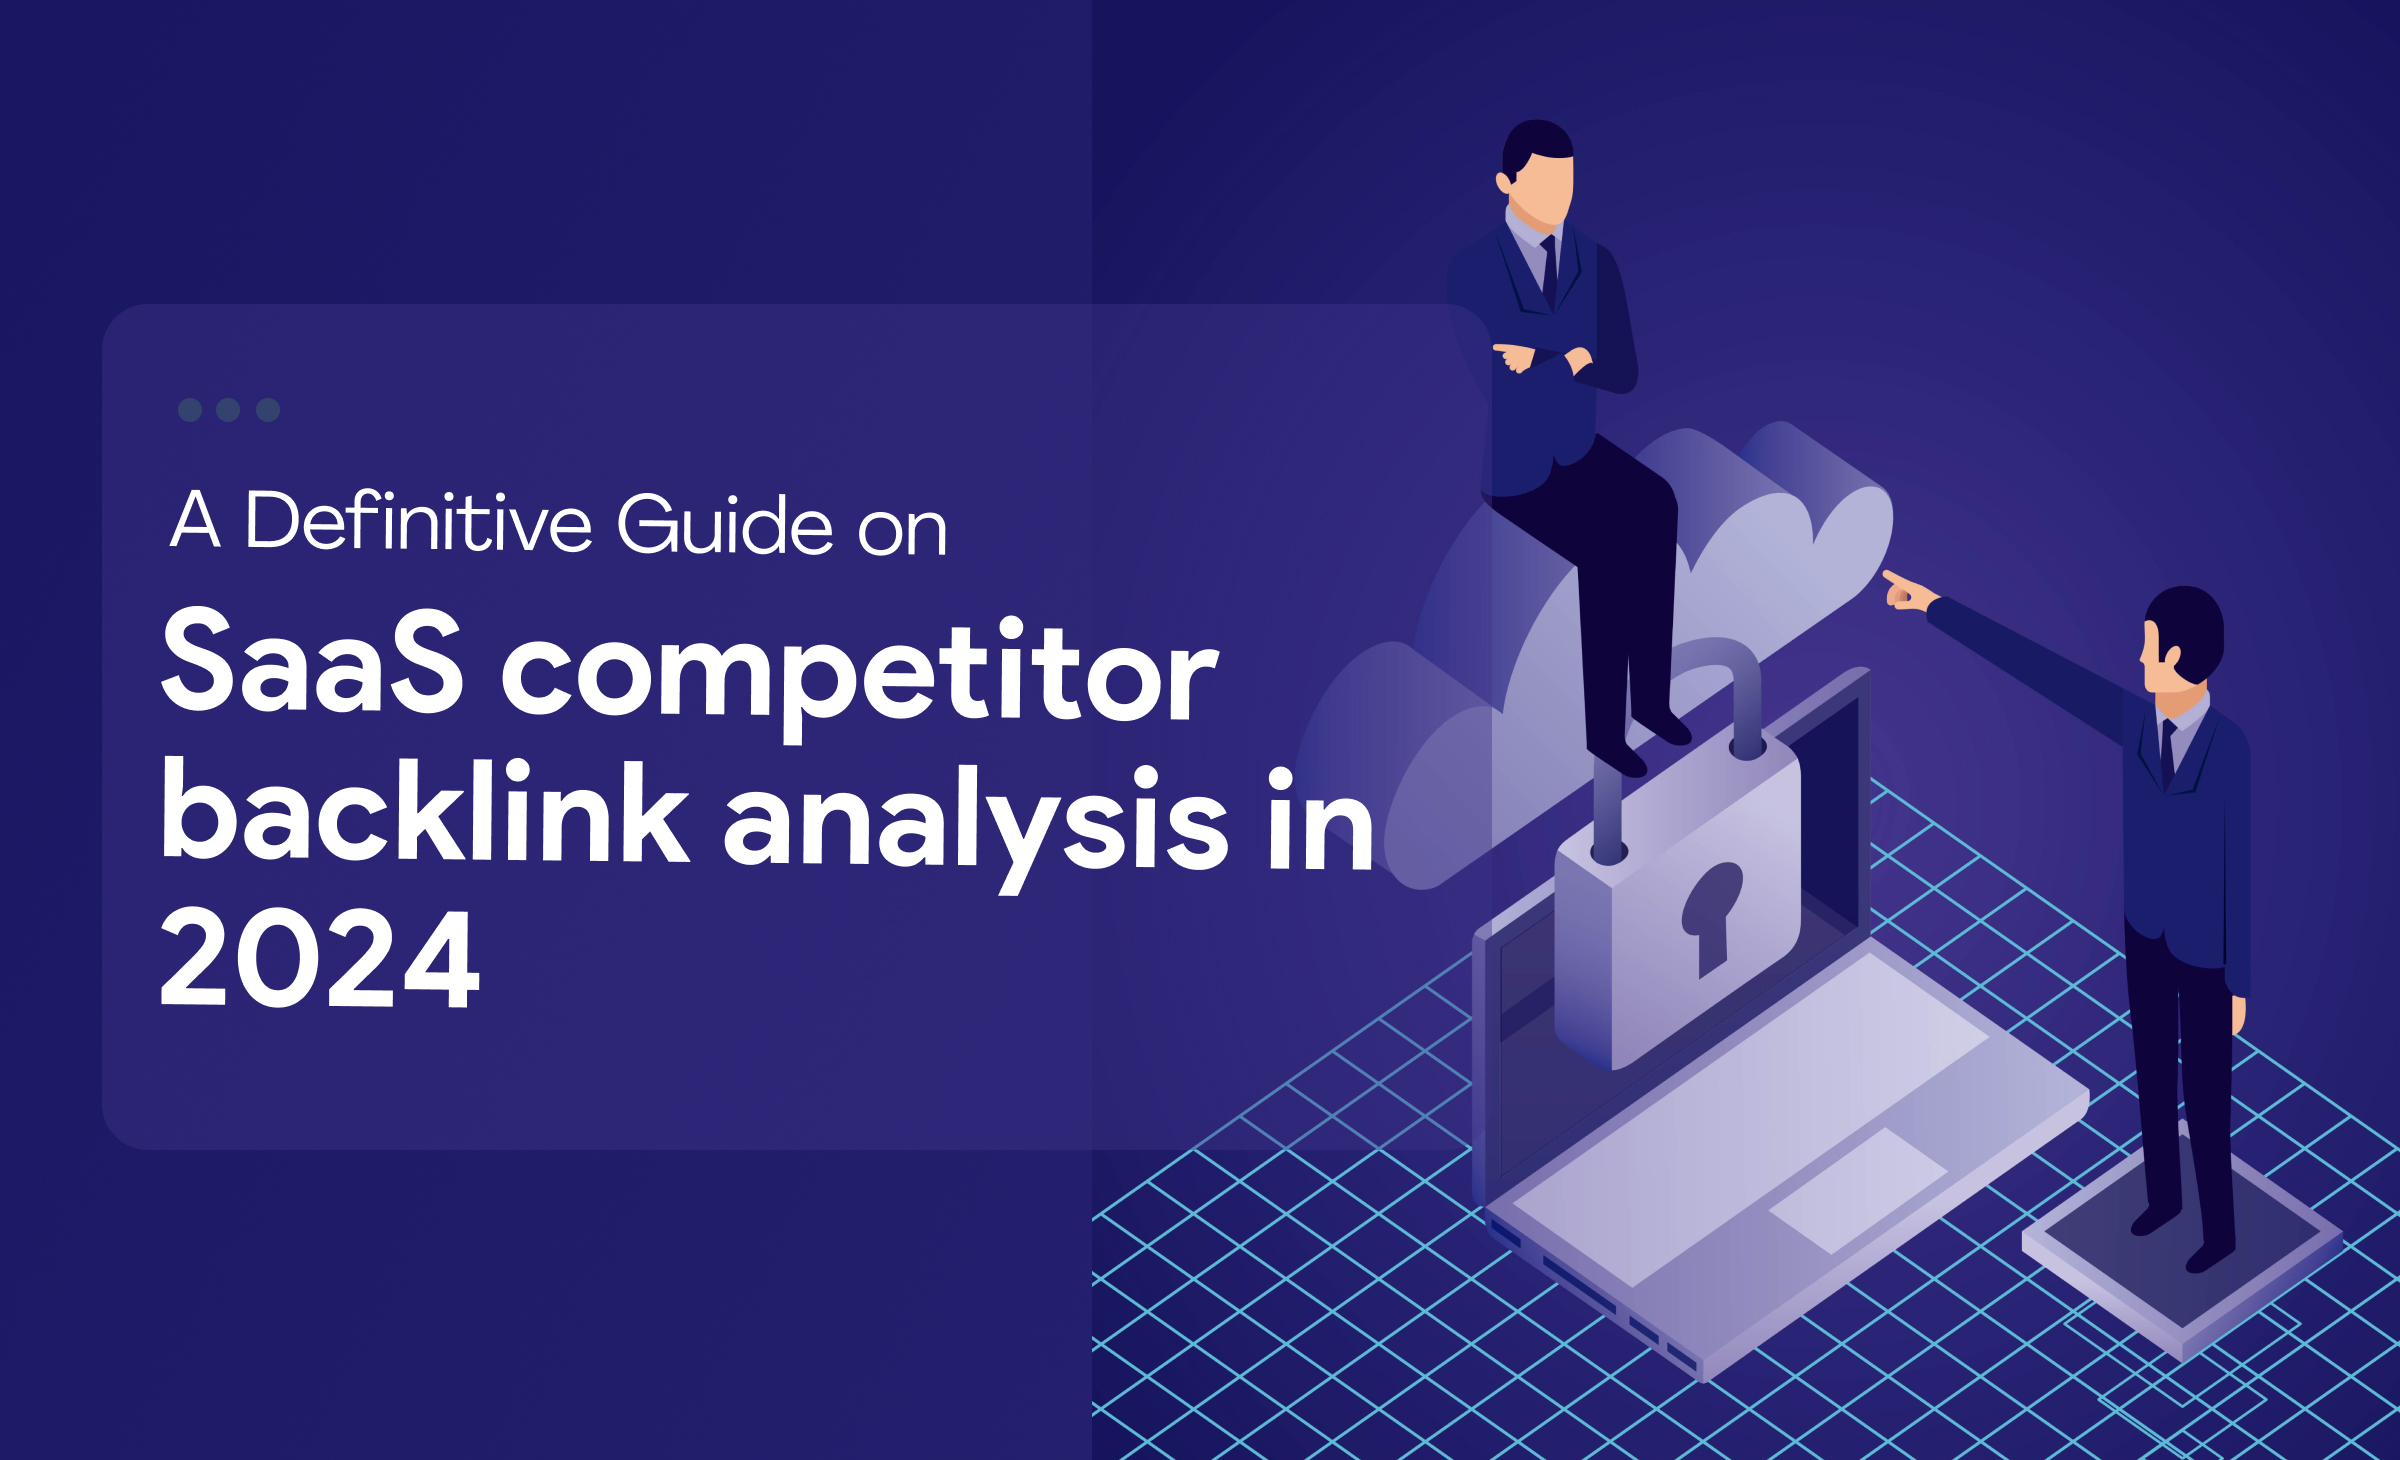 A Definitive Guide on SaaS competitor backlink analysis